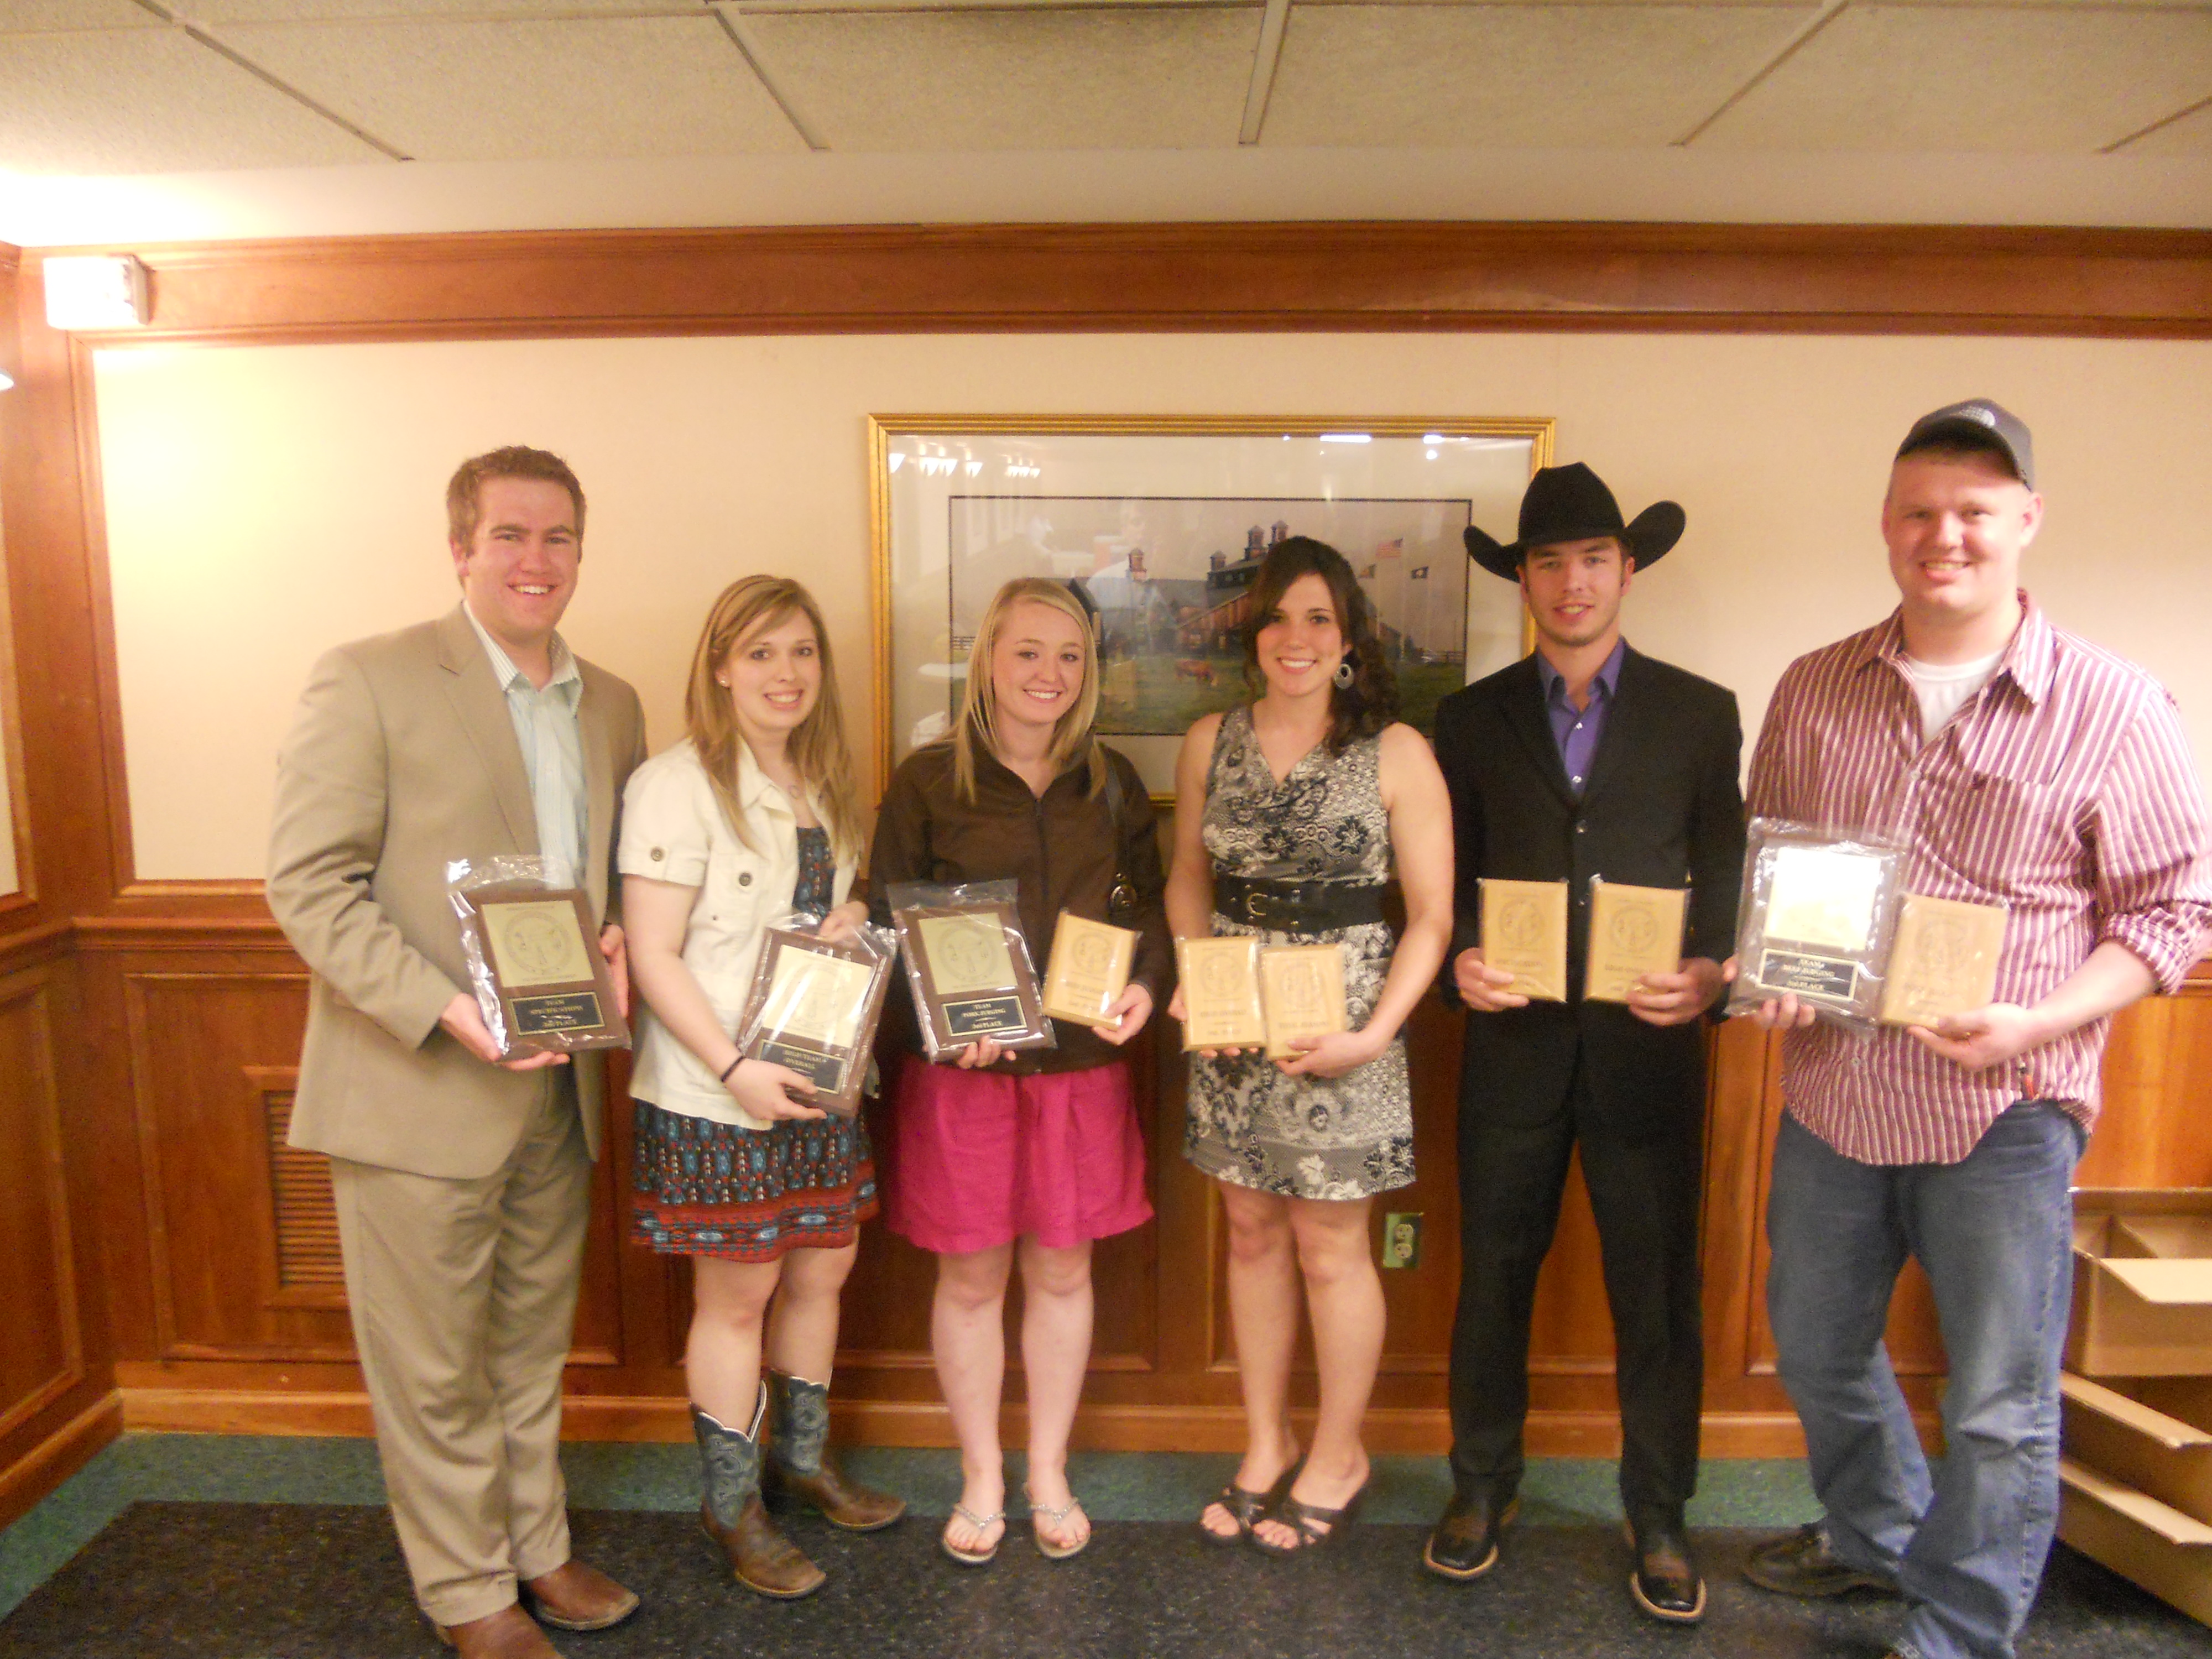 NDSU's meat judging team members display awards they received at the Southeastern Intercollegiate Meat Contest. Pictured are, from left to right: team member Levi Hall; coach Kelsey Phelps; team members Micayla Clarin, Christine Wanner and Mason Lautenschlager; and coach Nathan Hayes.